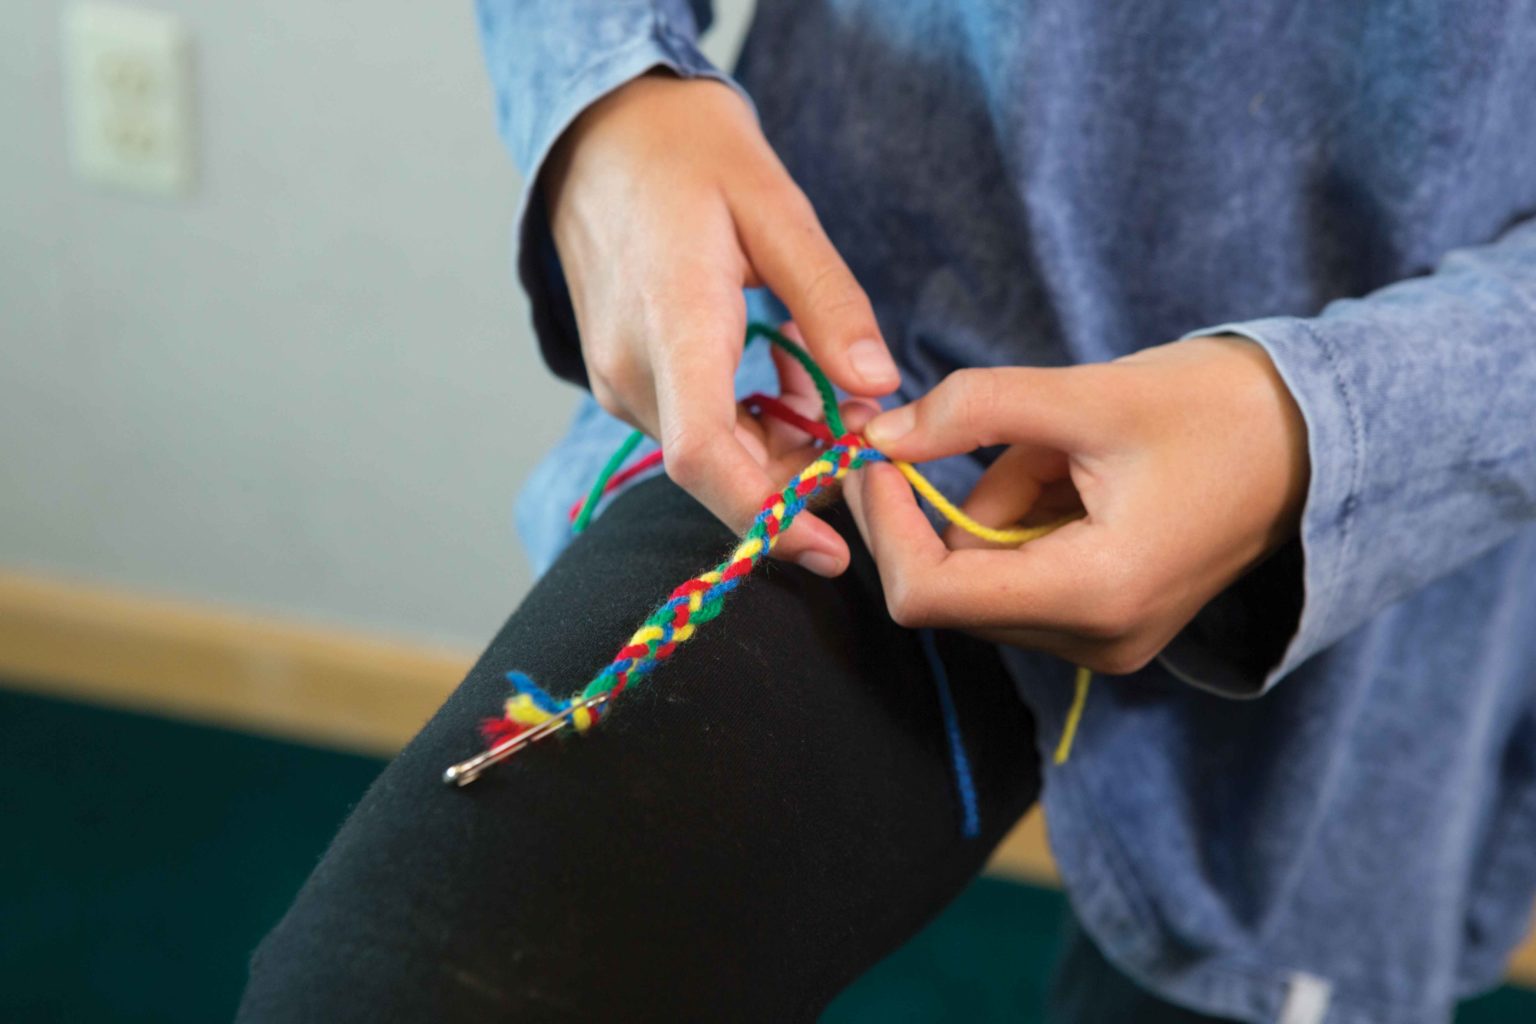 Four strings of colorful yarn being braided by a child.